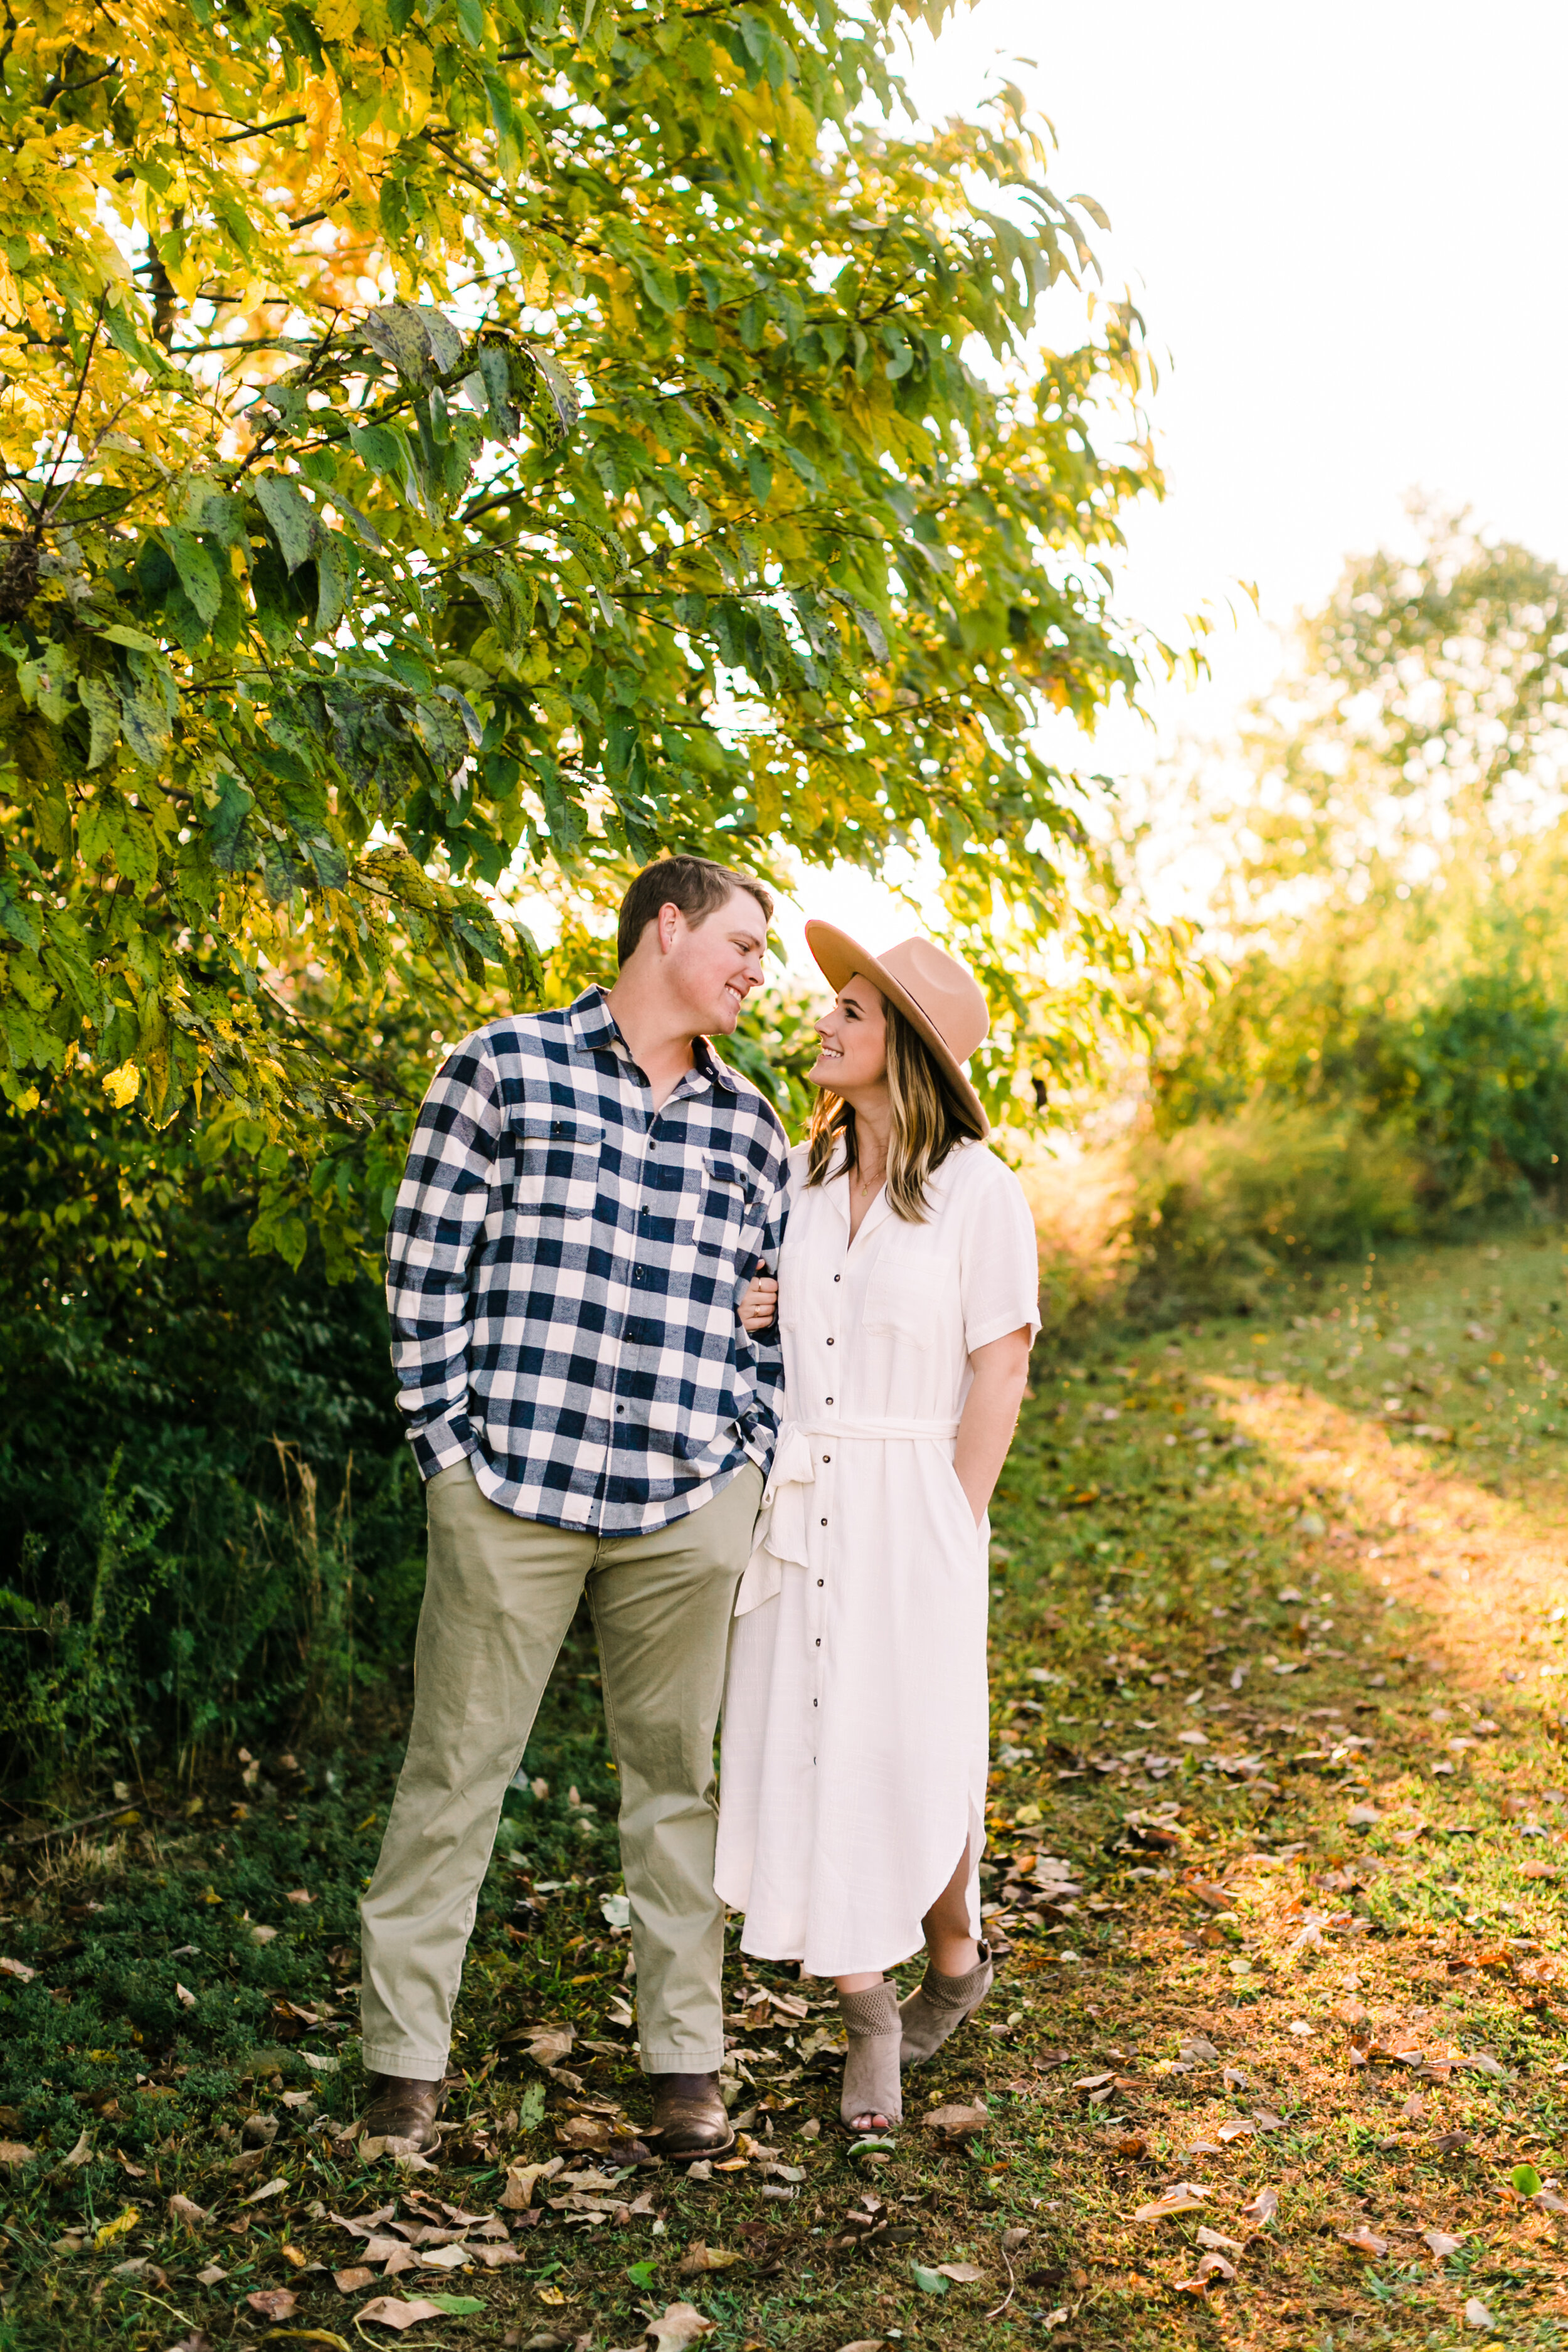 Tennessee+Fall+Engagement+Photos+Puppy (47 of 63).jpg